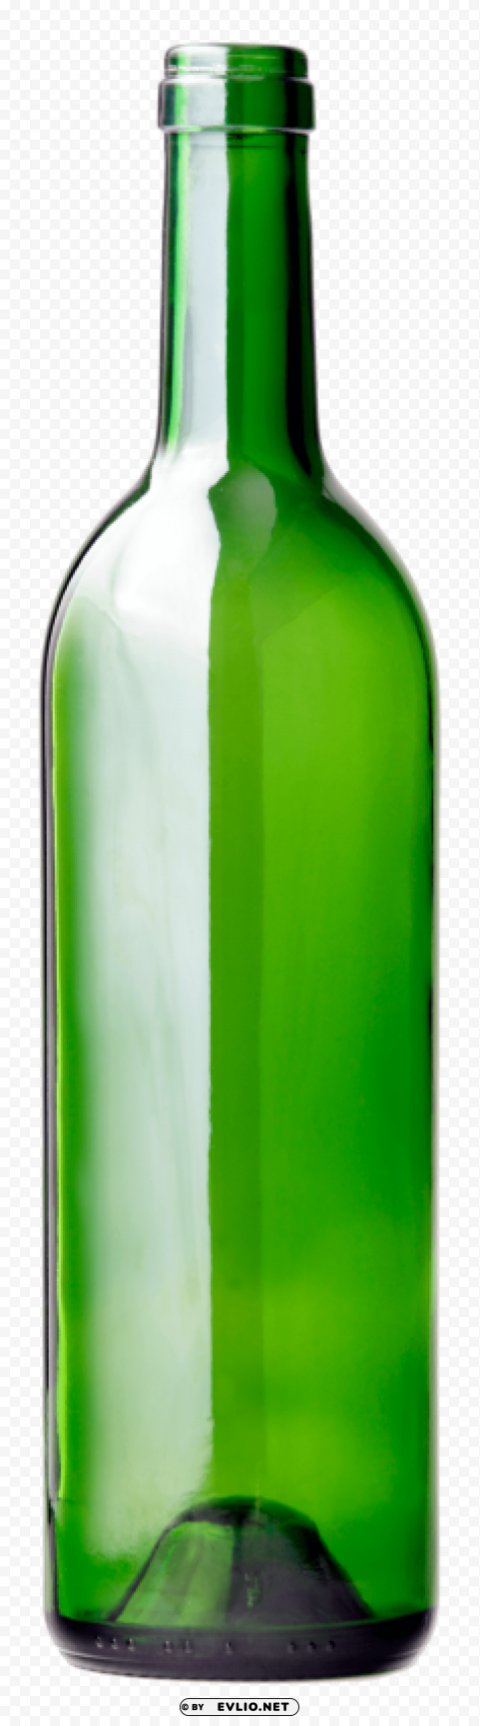 Long Green Bottle - Image ID ccad697c ClearCut Background PNG Isolated Item